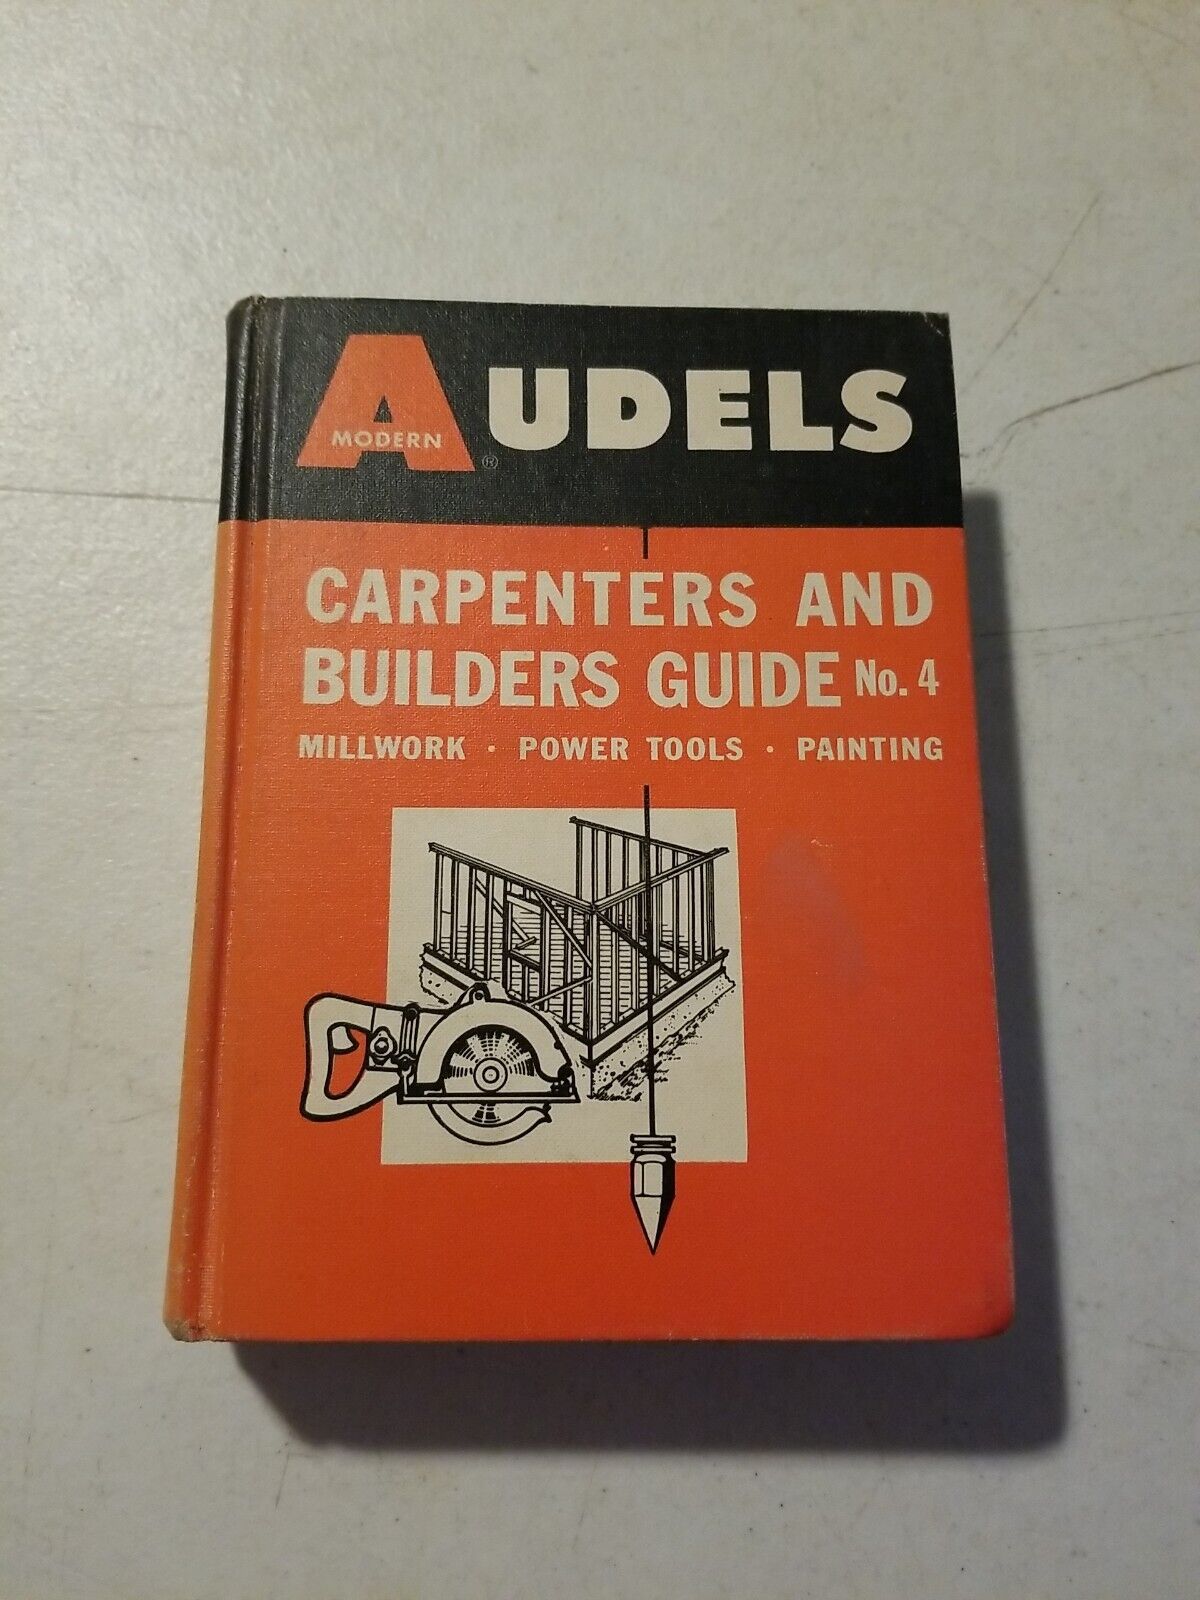 AUDELS Carpenters and Builders Guide No. 4 1966 Frank P. Graham Hardcover